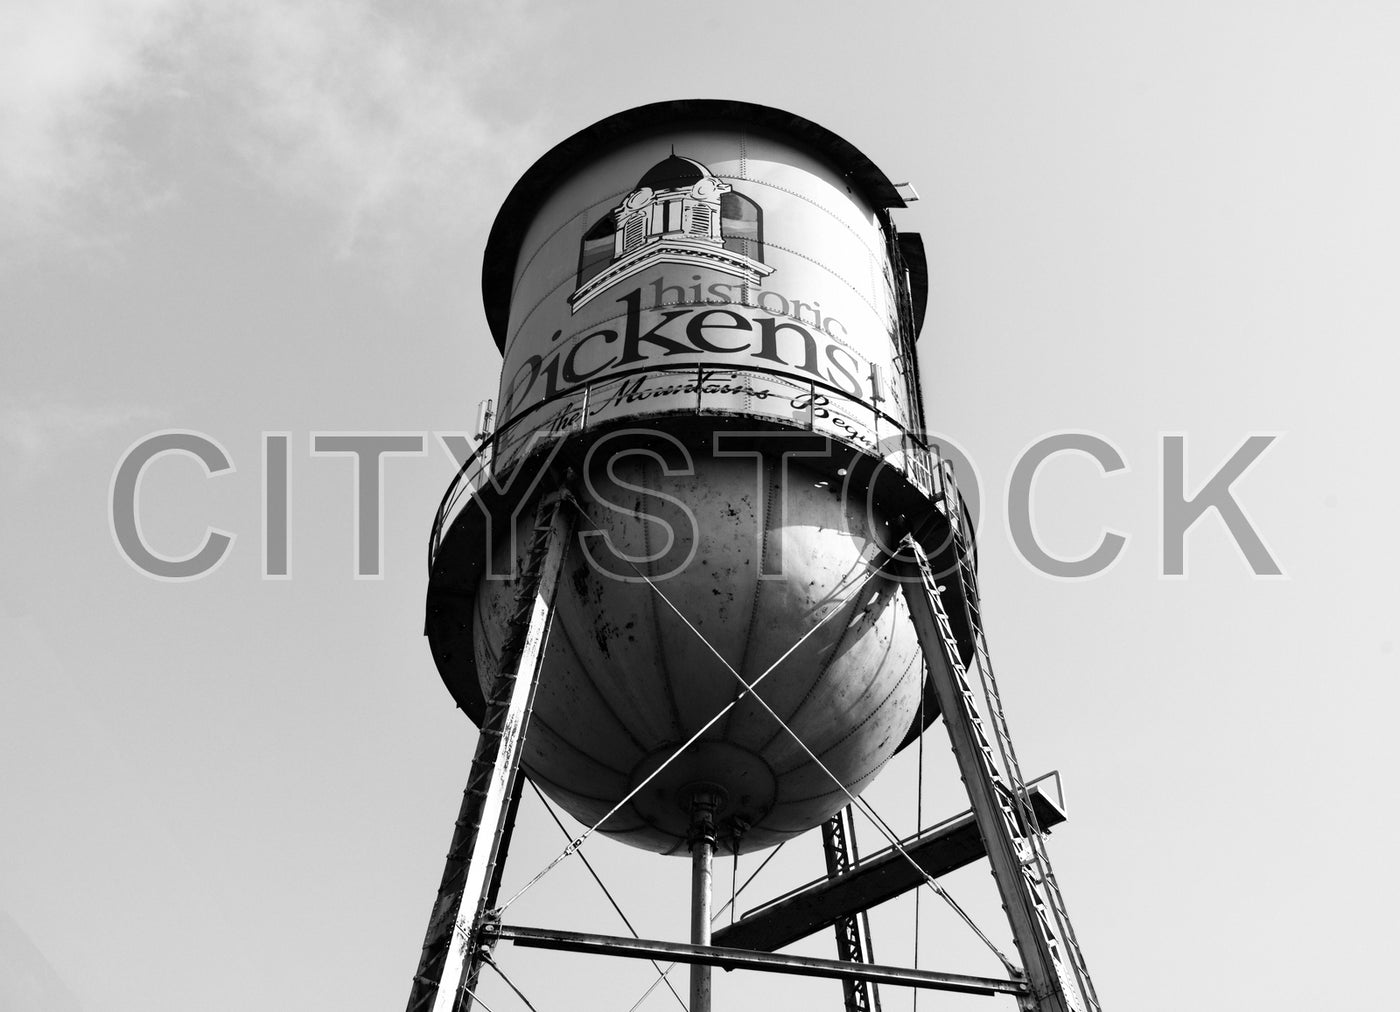 Black and white image of the historic Pickens water tower